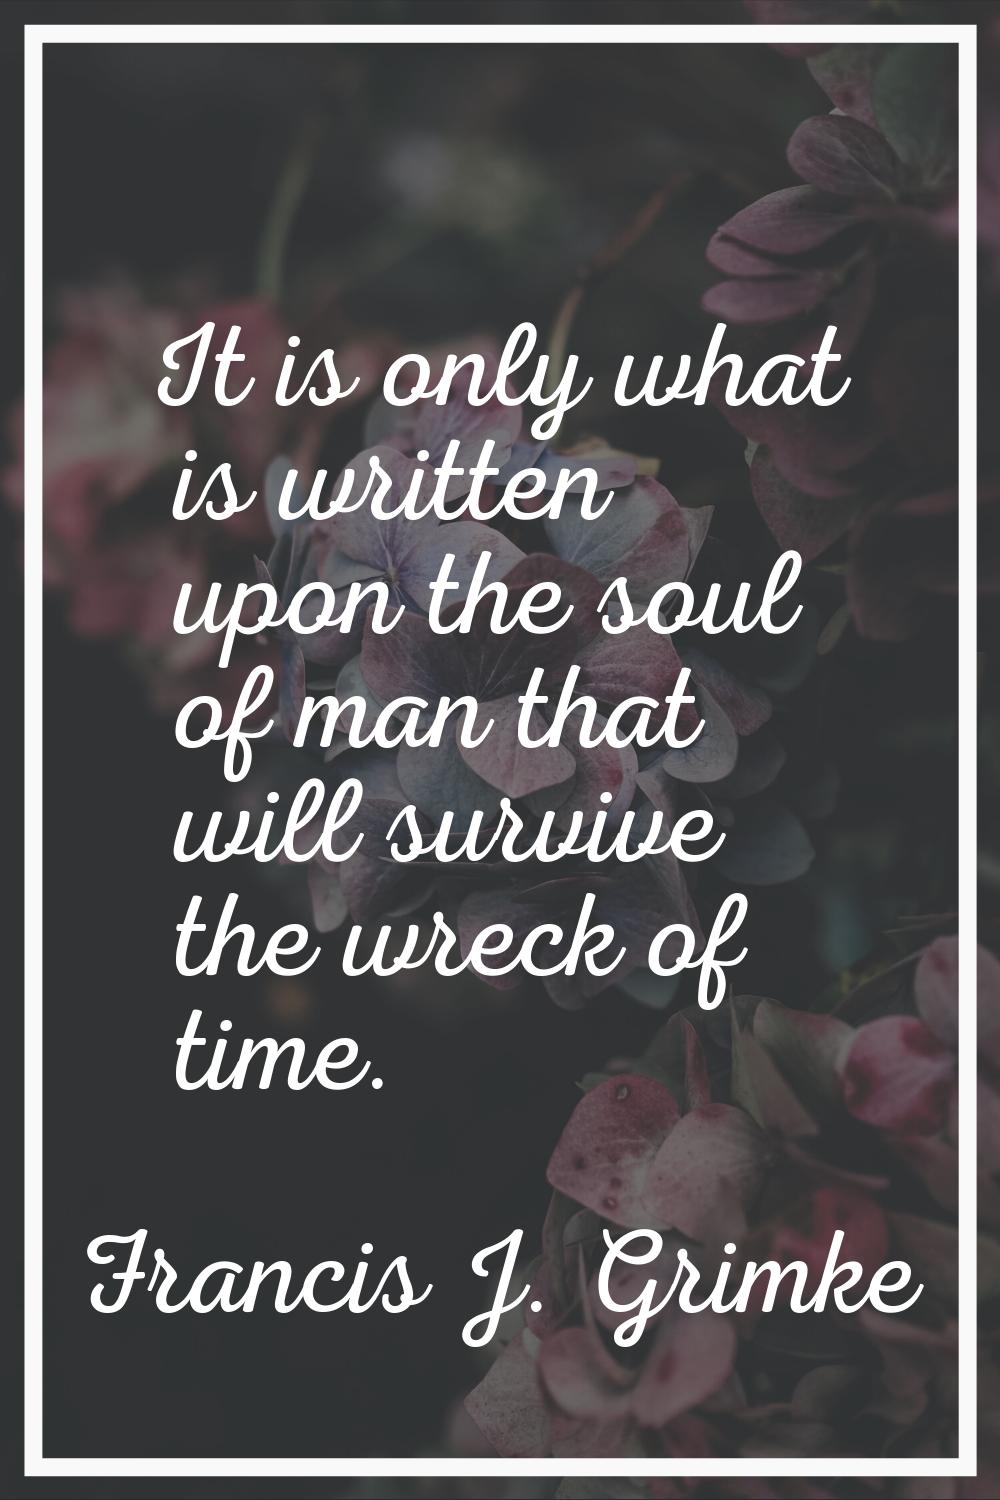 It is only what is written upon the soul of man that will survive the wreck of time.